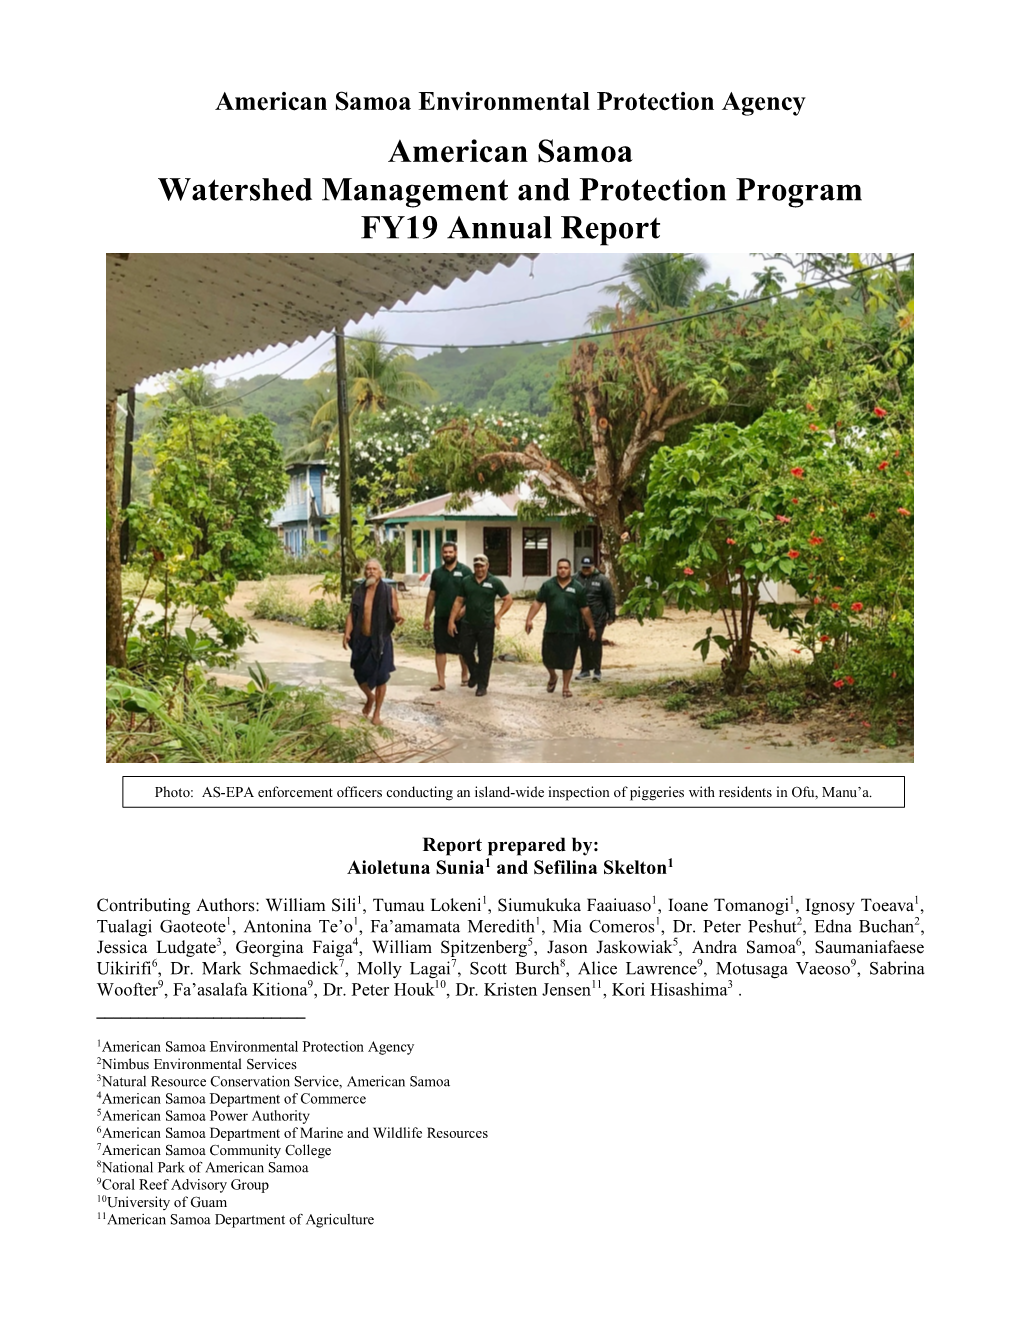 American Samoa Watershed Management and Protection Program FY19 Annual Report